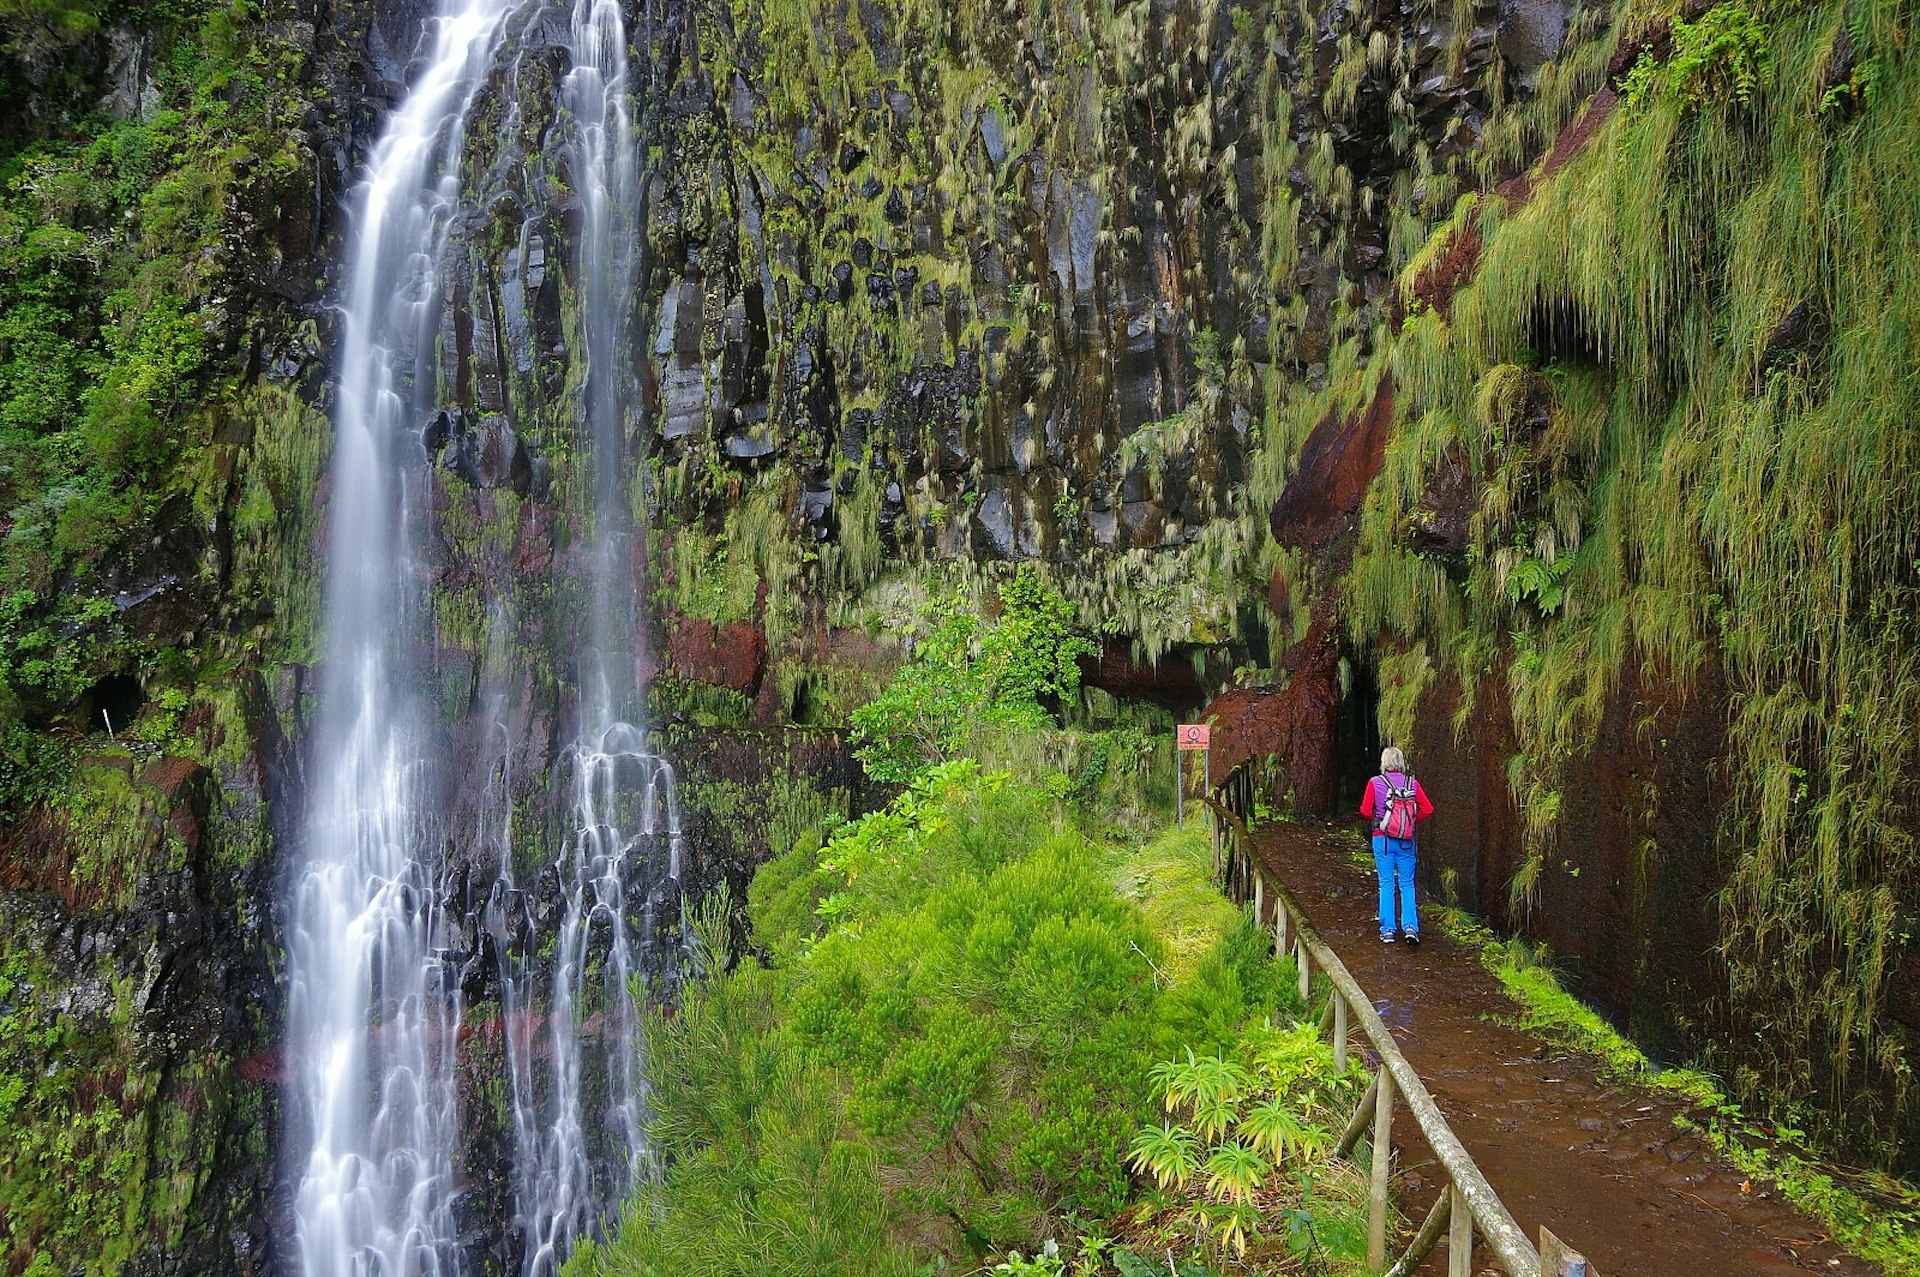 A woman stands by a levada, an open irrigation channel specific to Madeira, looking at a waterfall amid dense greenery and leafy scenery. She wears a colourful backpack, bright blue trousers and a purple gilet over a red long-sleeved top.